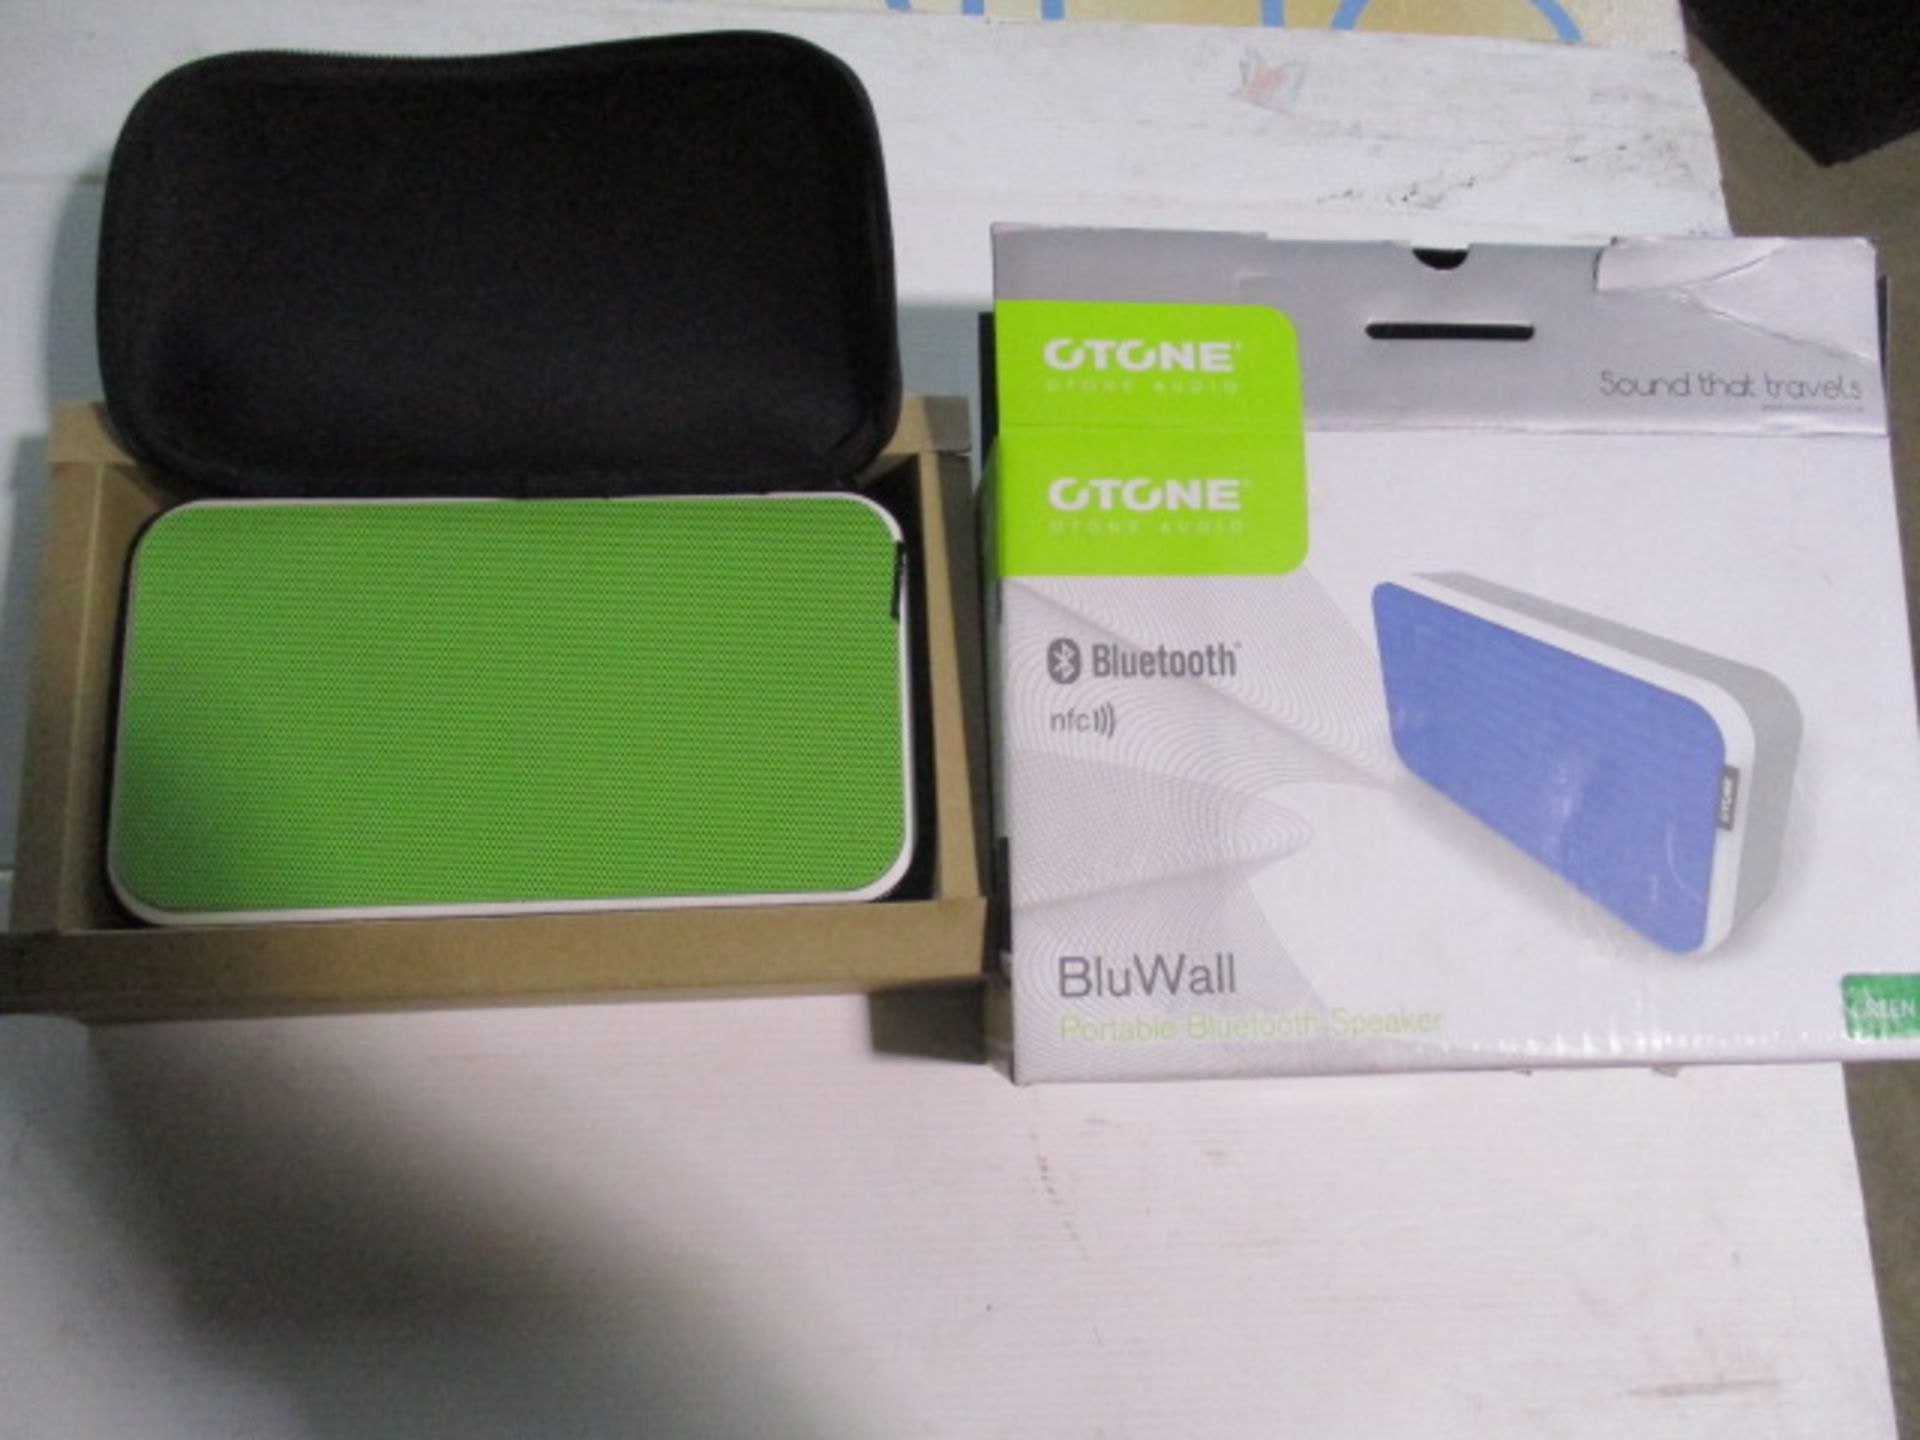 Otone BluWall Wireless bluetooth speaker New and boxed and unchecked